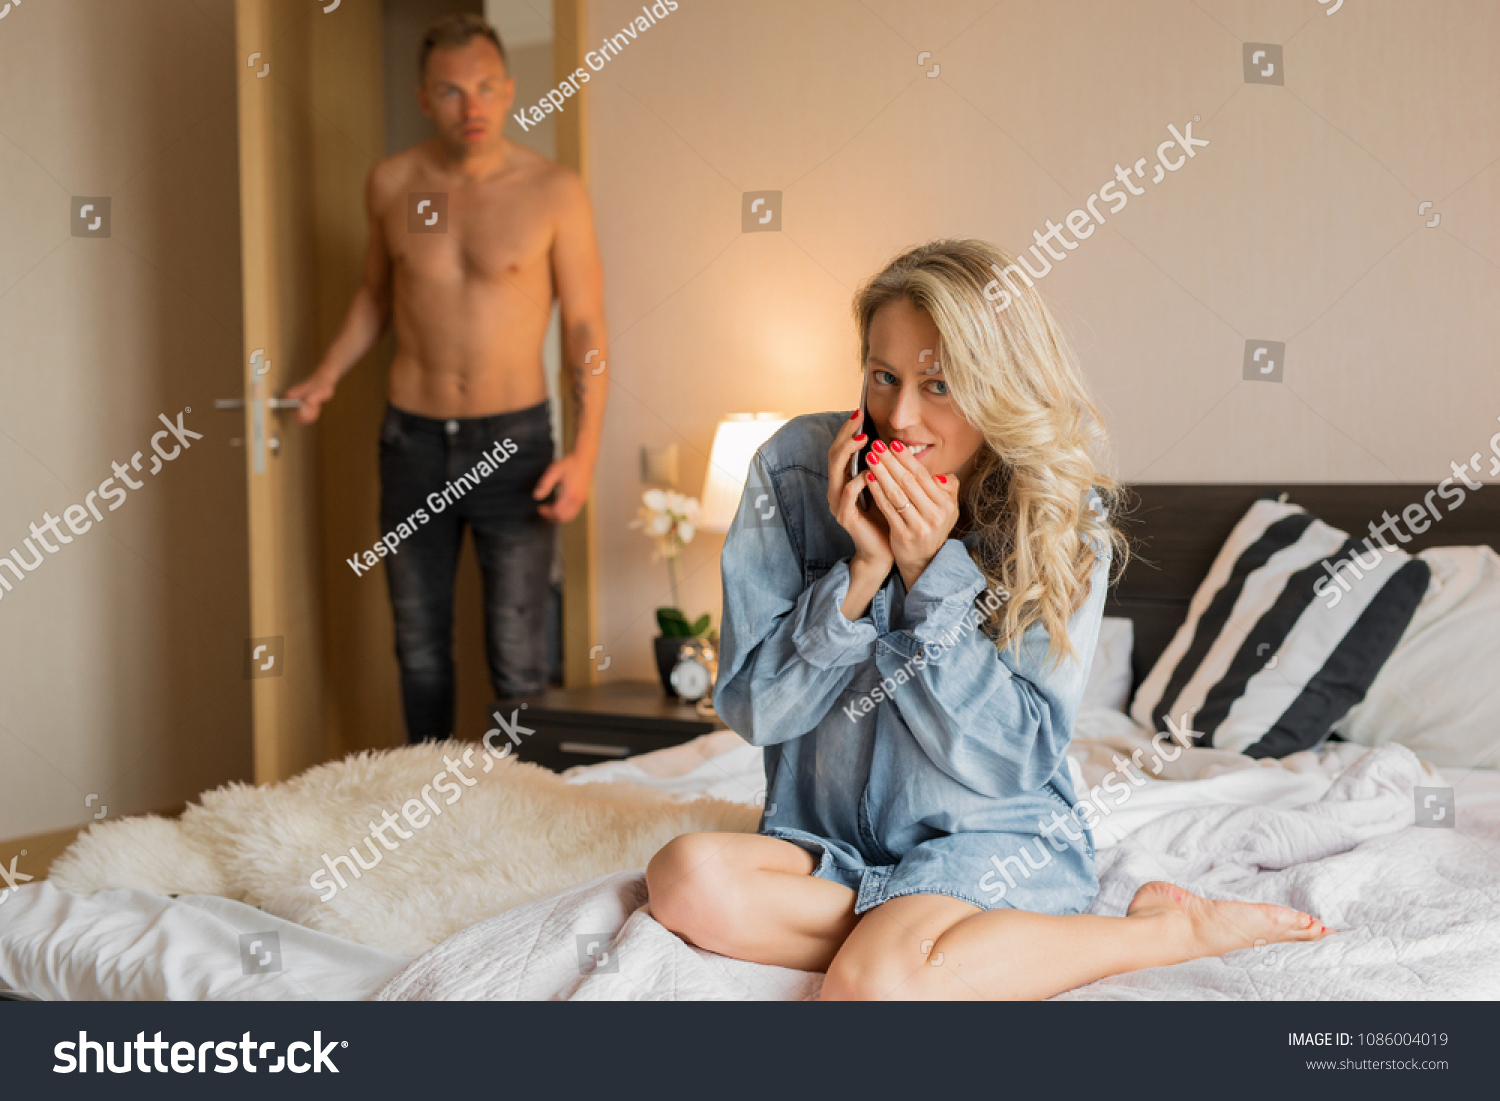 Cheating caught by husband